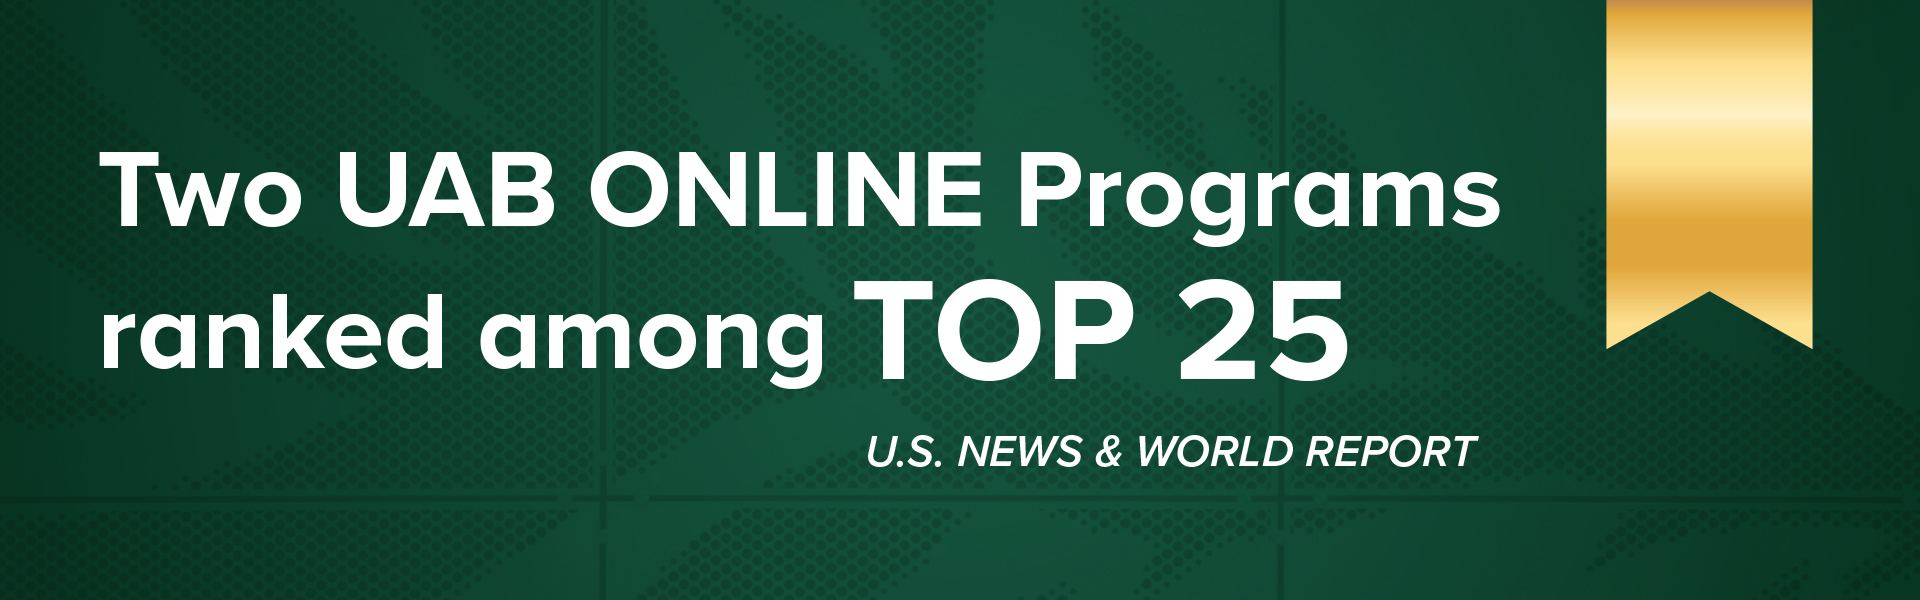 UAB Online highlighted among Top 25 programs in two categories